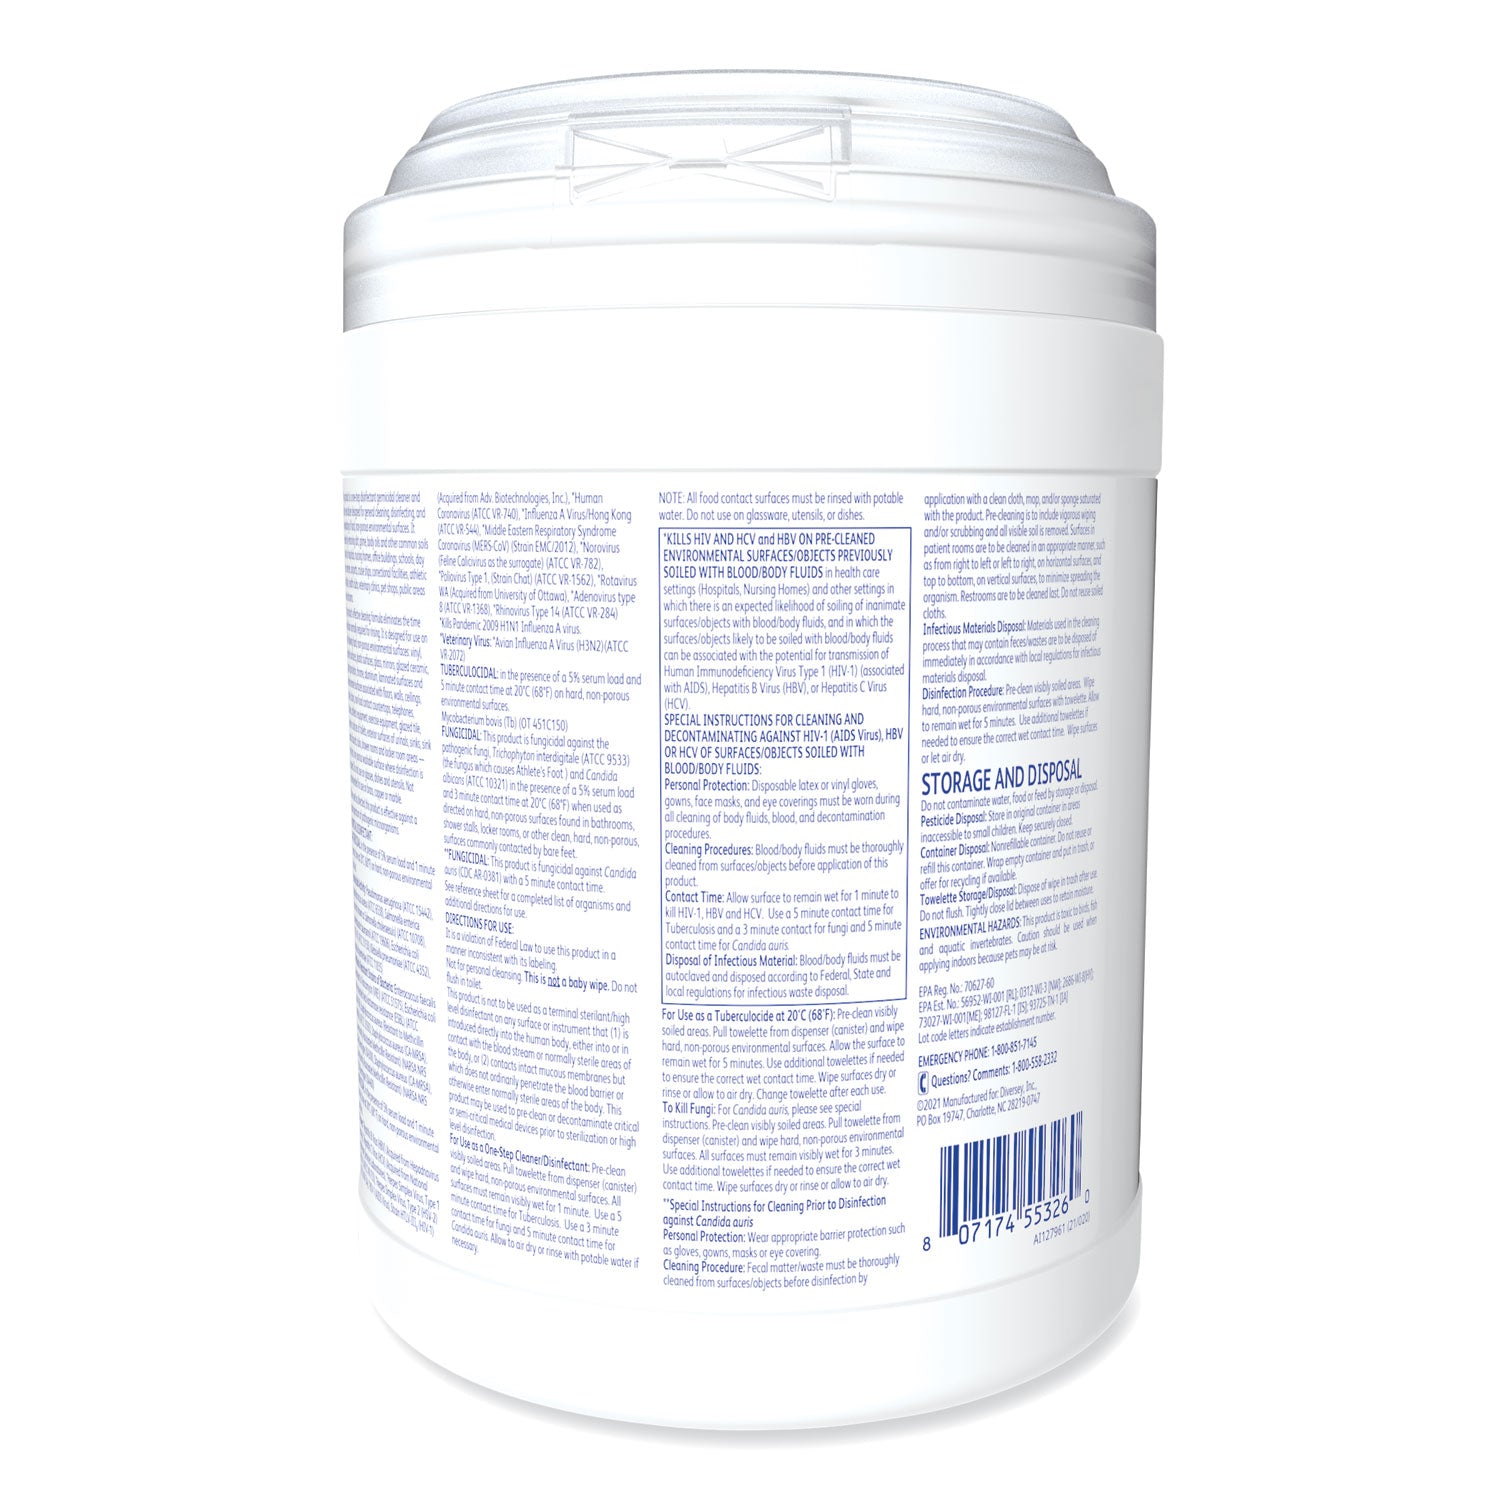 oxivir-tb-disinfectant-wipes-6-x-69-characteristic-scent-white-160-canister-4-canisters-carton_dvo101105152 - 3